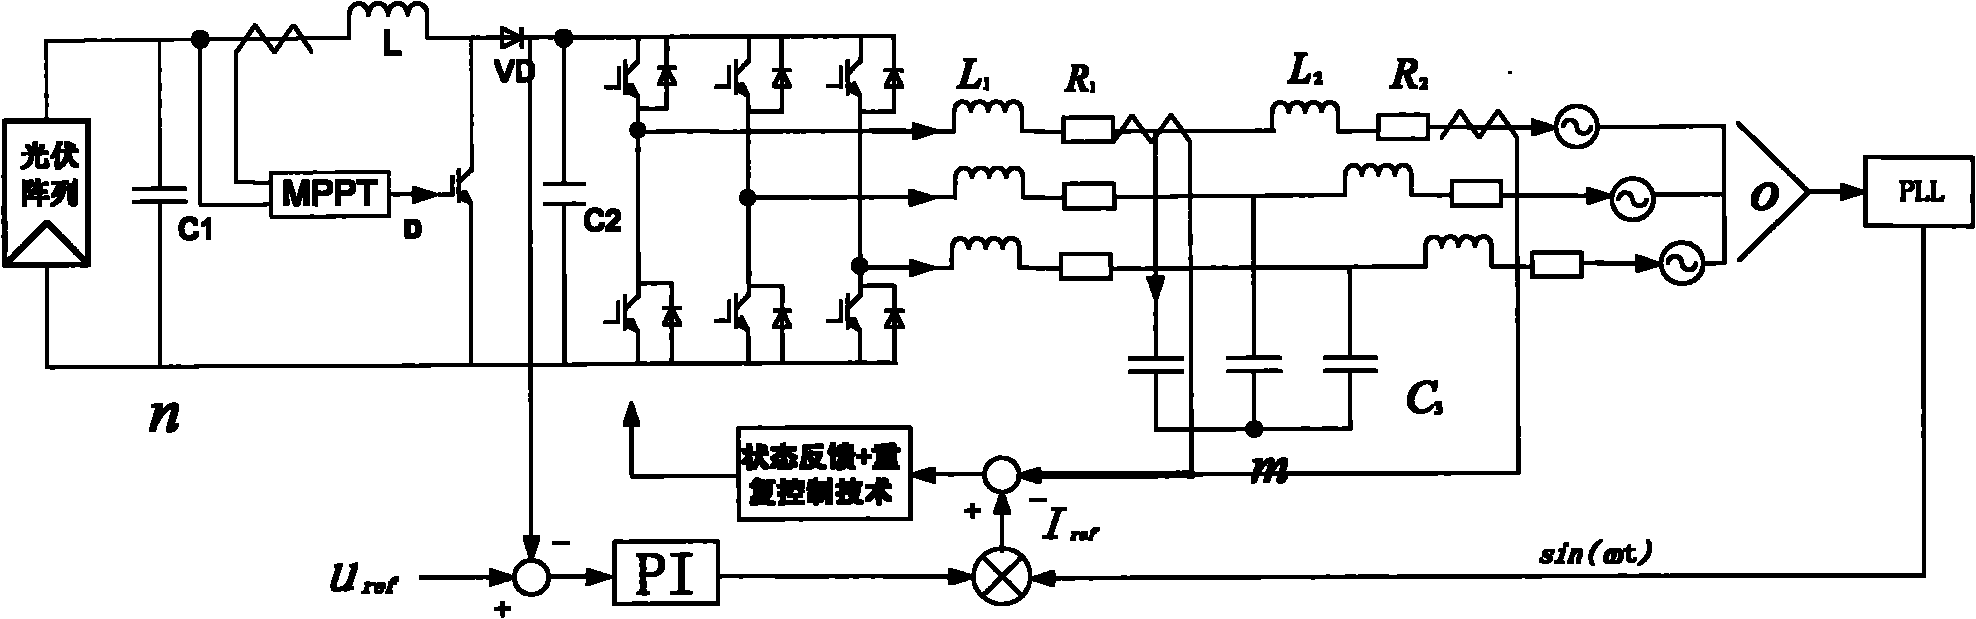 Two-stage photovoltaic grid-connected control system based on combination of pole allocation and repetitive control